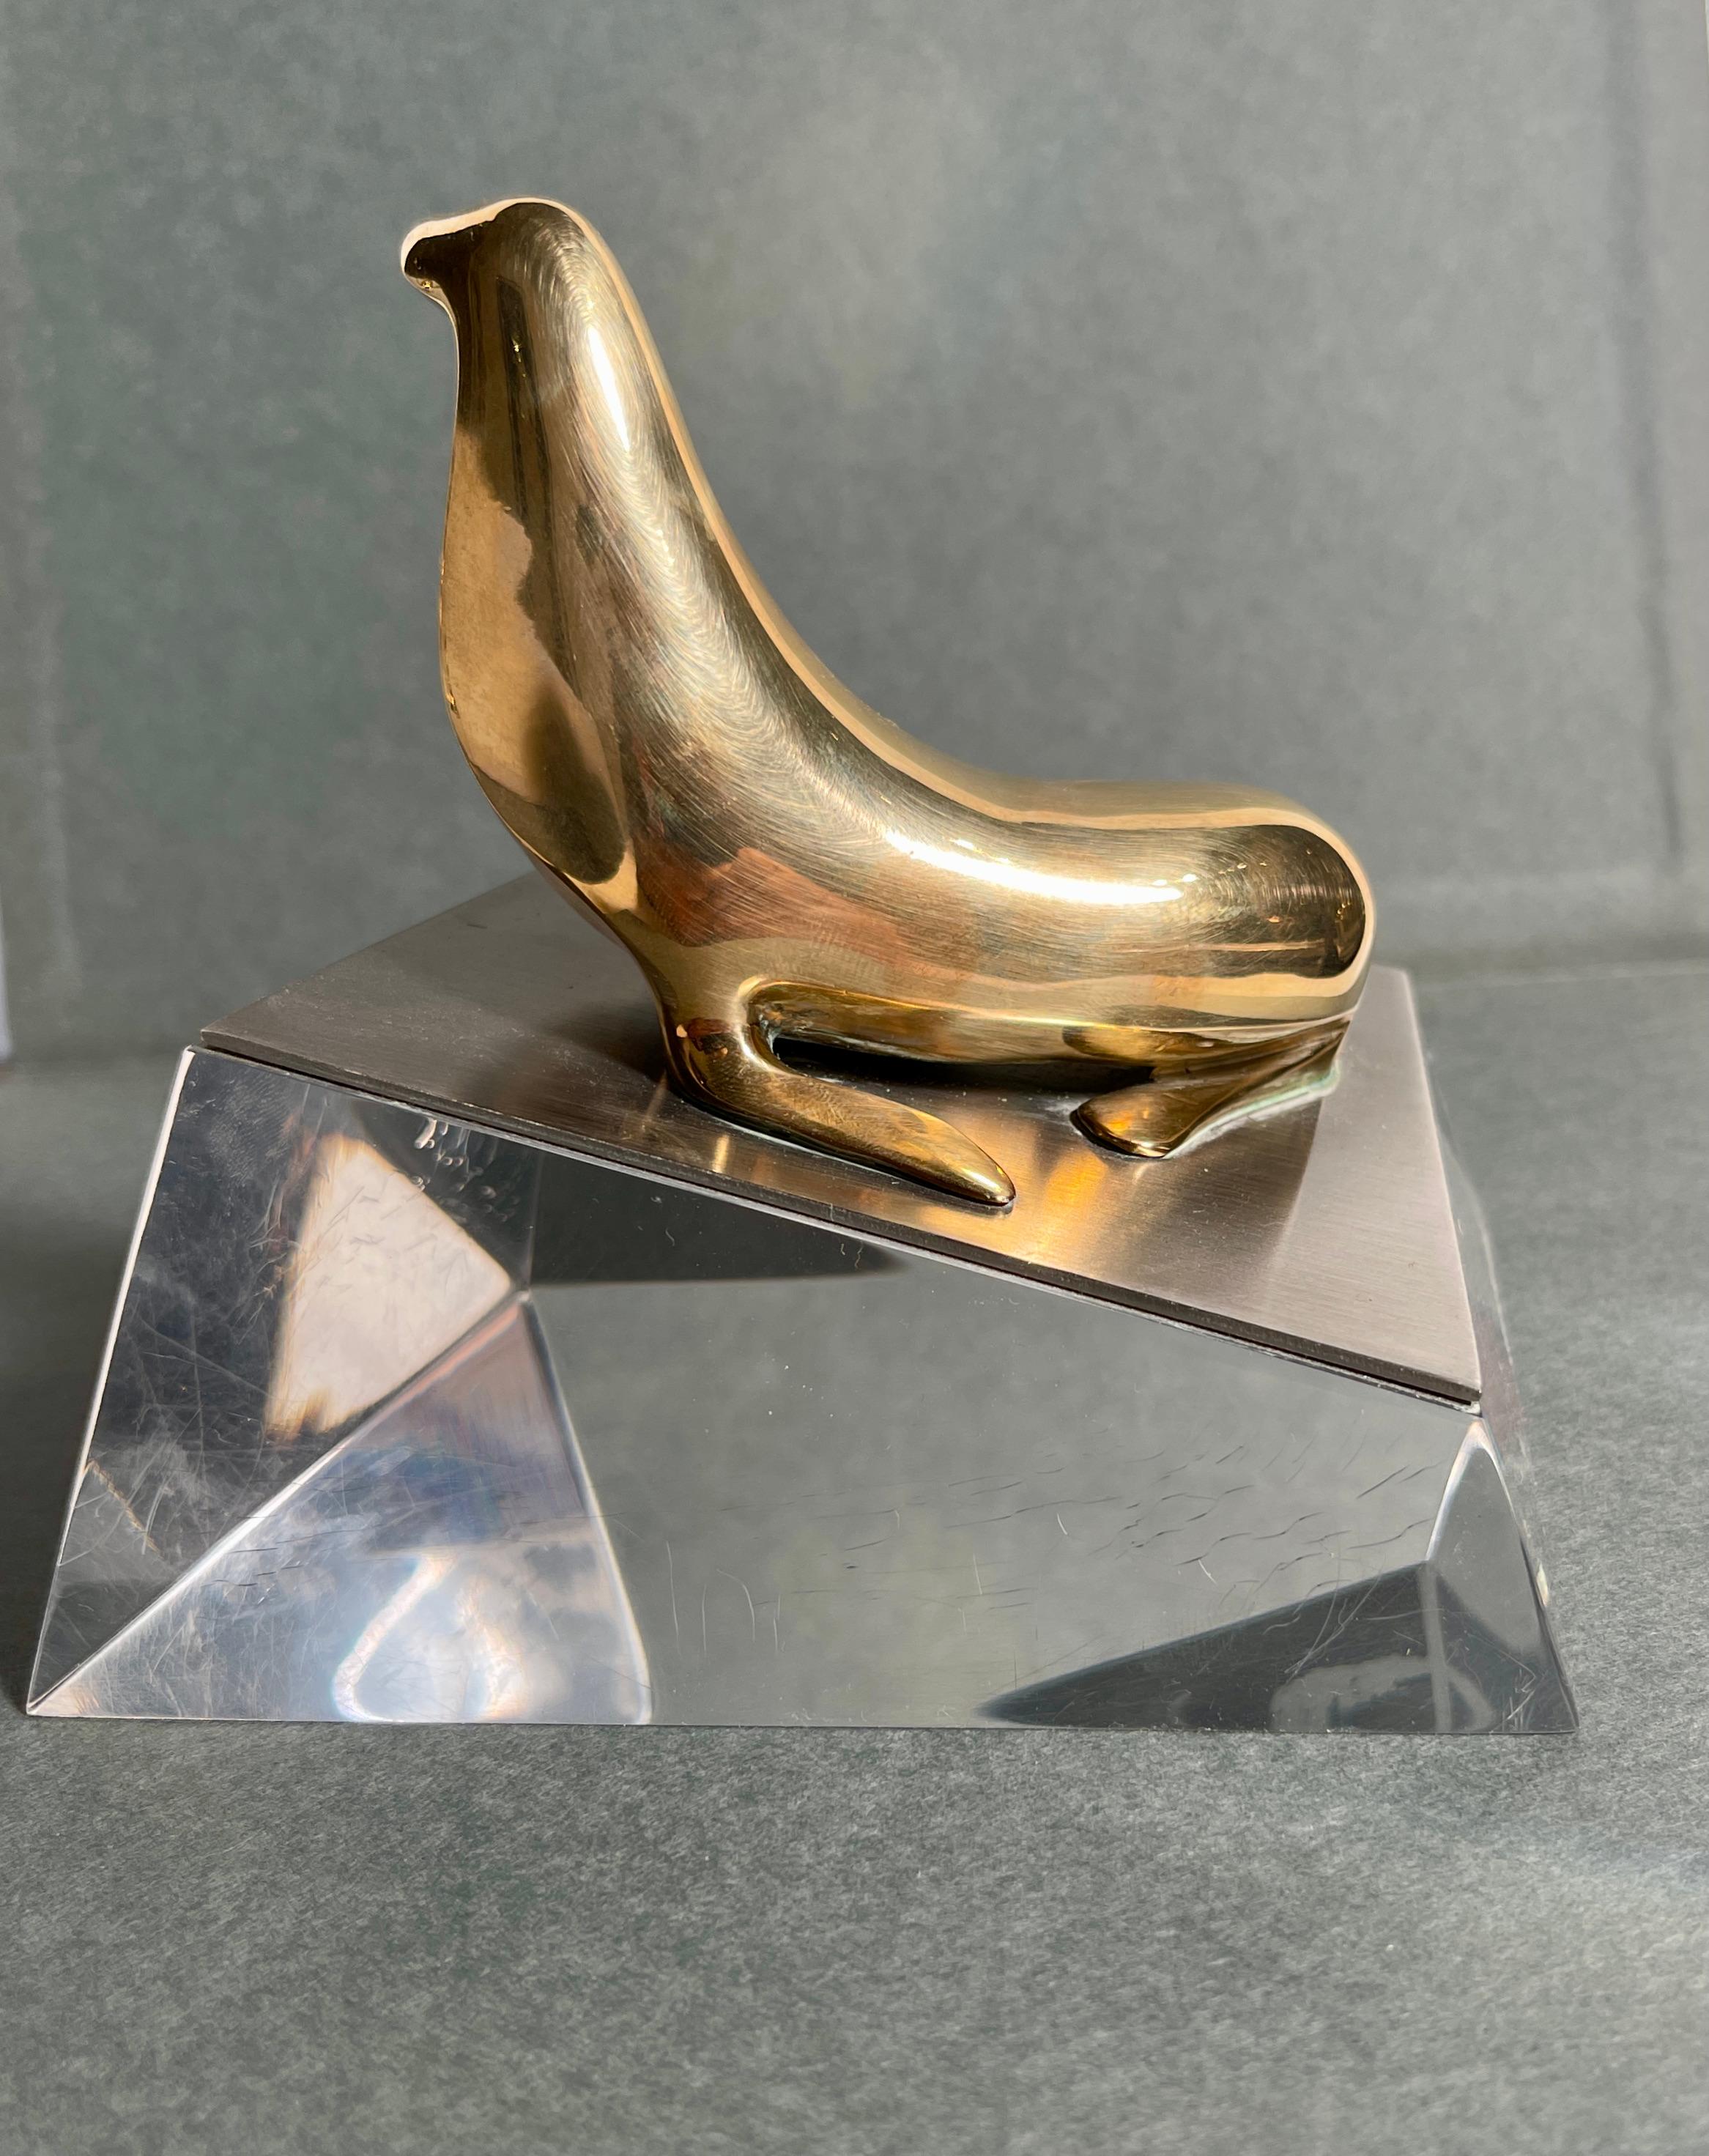 Loet Vanderveen Bronze Seal Sculpture on lucite. Signed and numbered. Edition 60/500.